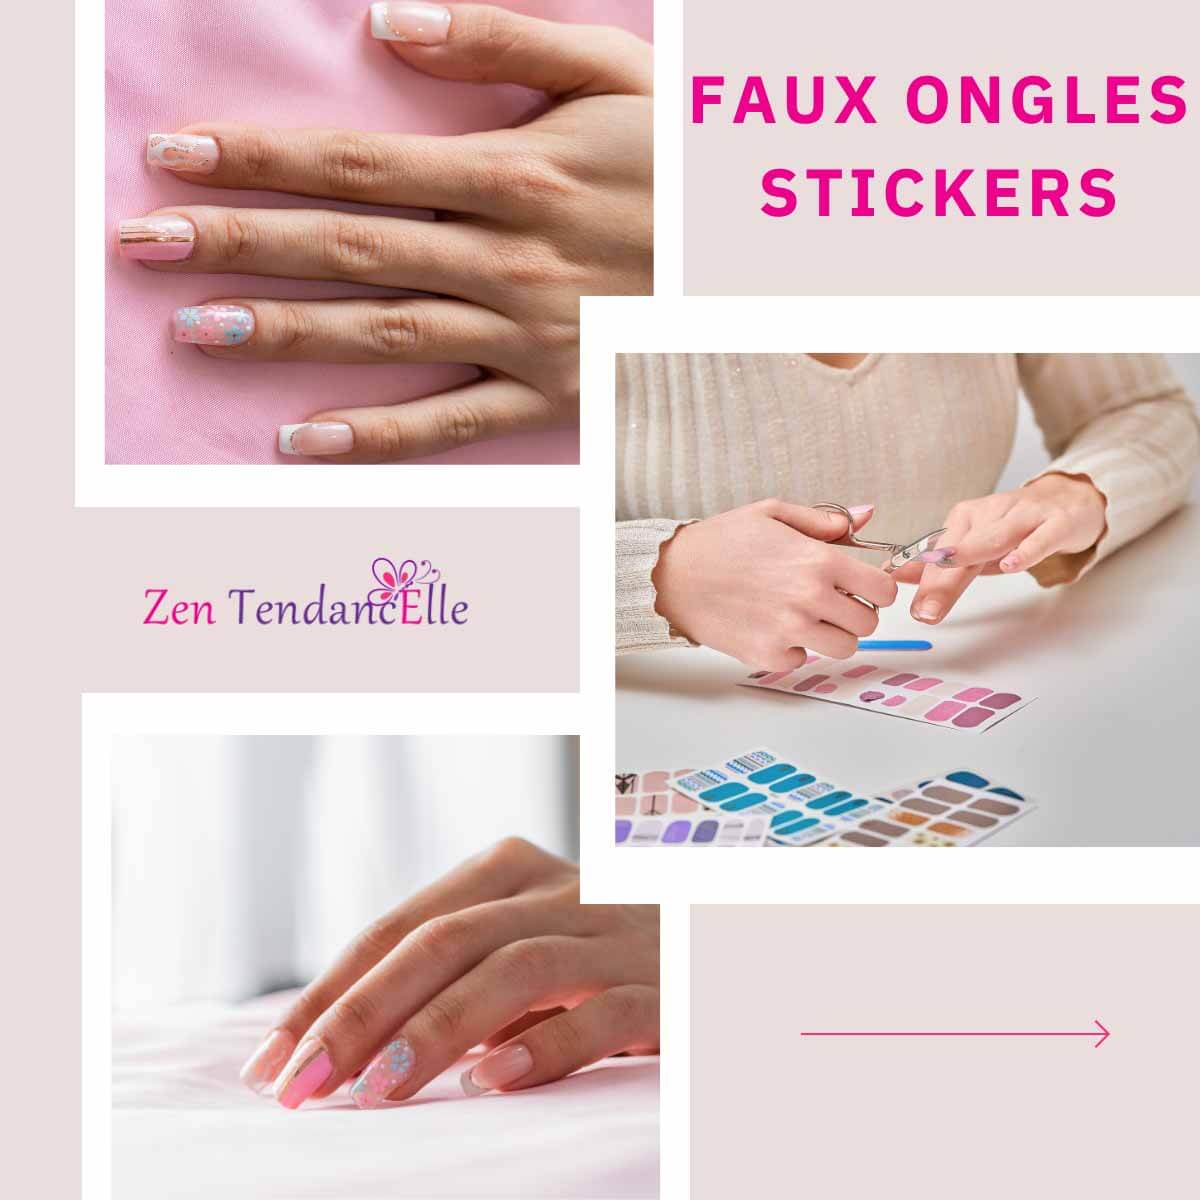 Faux-ongles_et_stickers_pour_ongles_manucure_AM-Cosmetiques.jpg